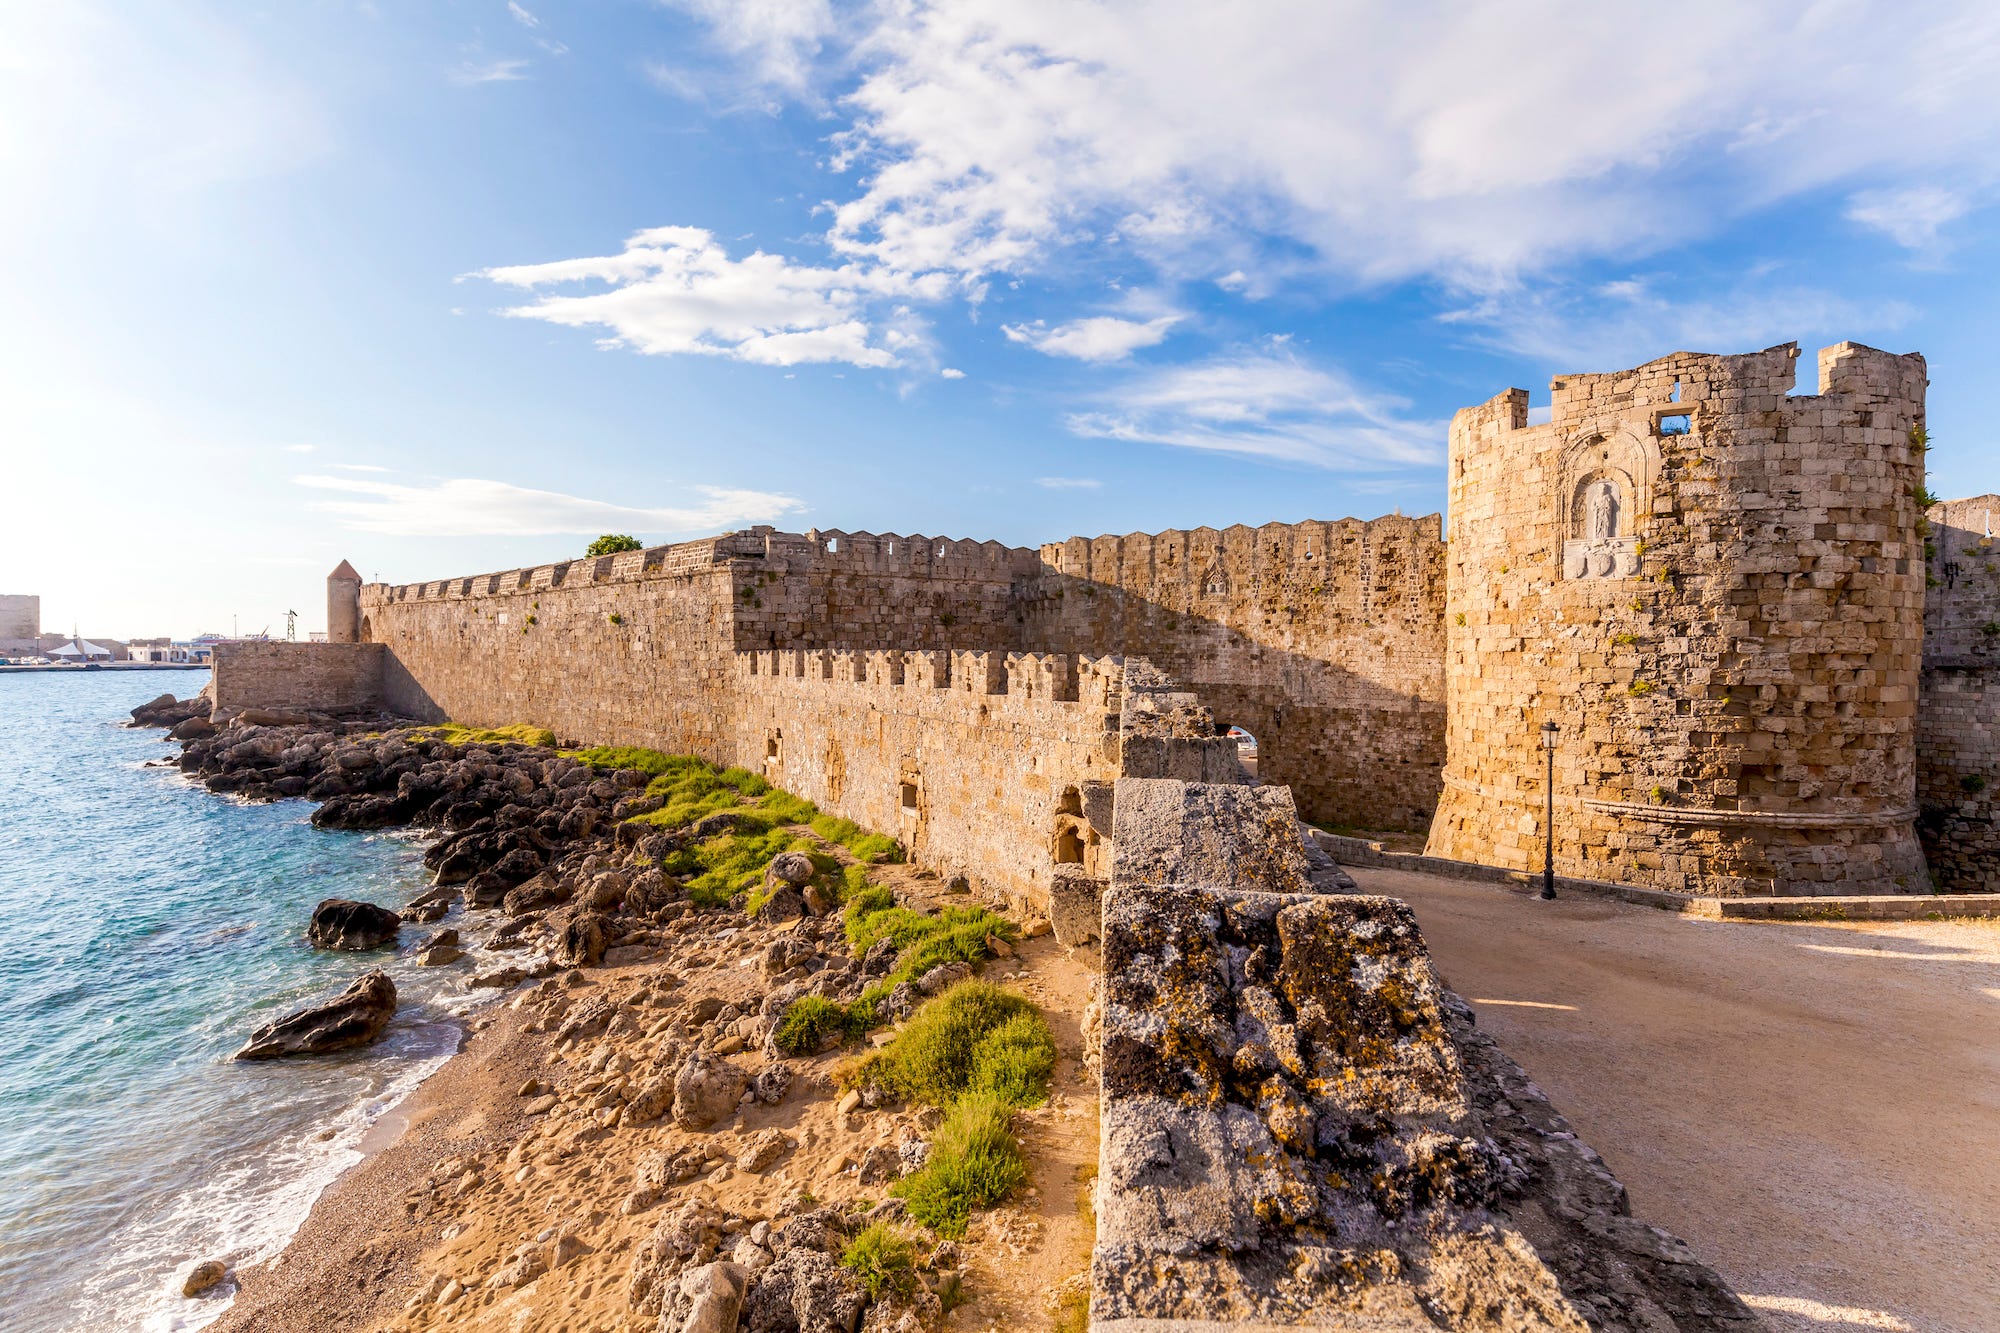 <p>Ruled by the Knights of St. John from the 14th to 16th century, Rhodes still feels steeped in medieval history. I remember being wowed as a kid while walking past the majestic castles, under the stone arches, and through the tiny cobblestone alleys on the island's Old Town. </p><p>Rhodes also has plenty of beautiful beaches, as well as Butterfly Valley — my mom's favorite part of the island.</p>